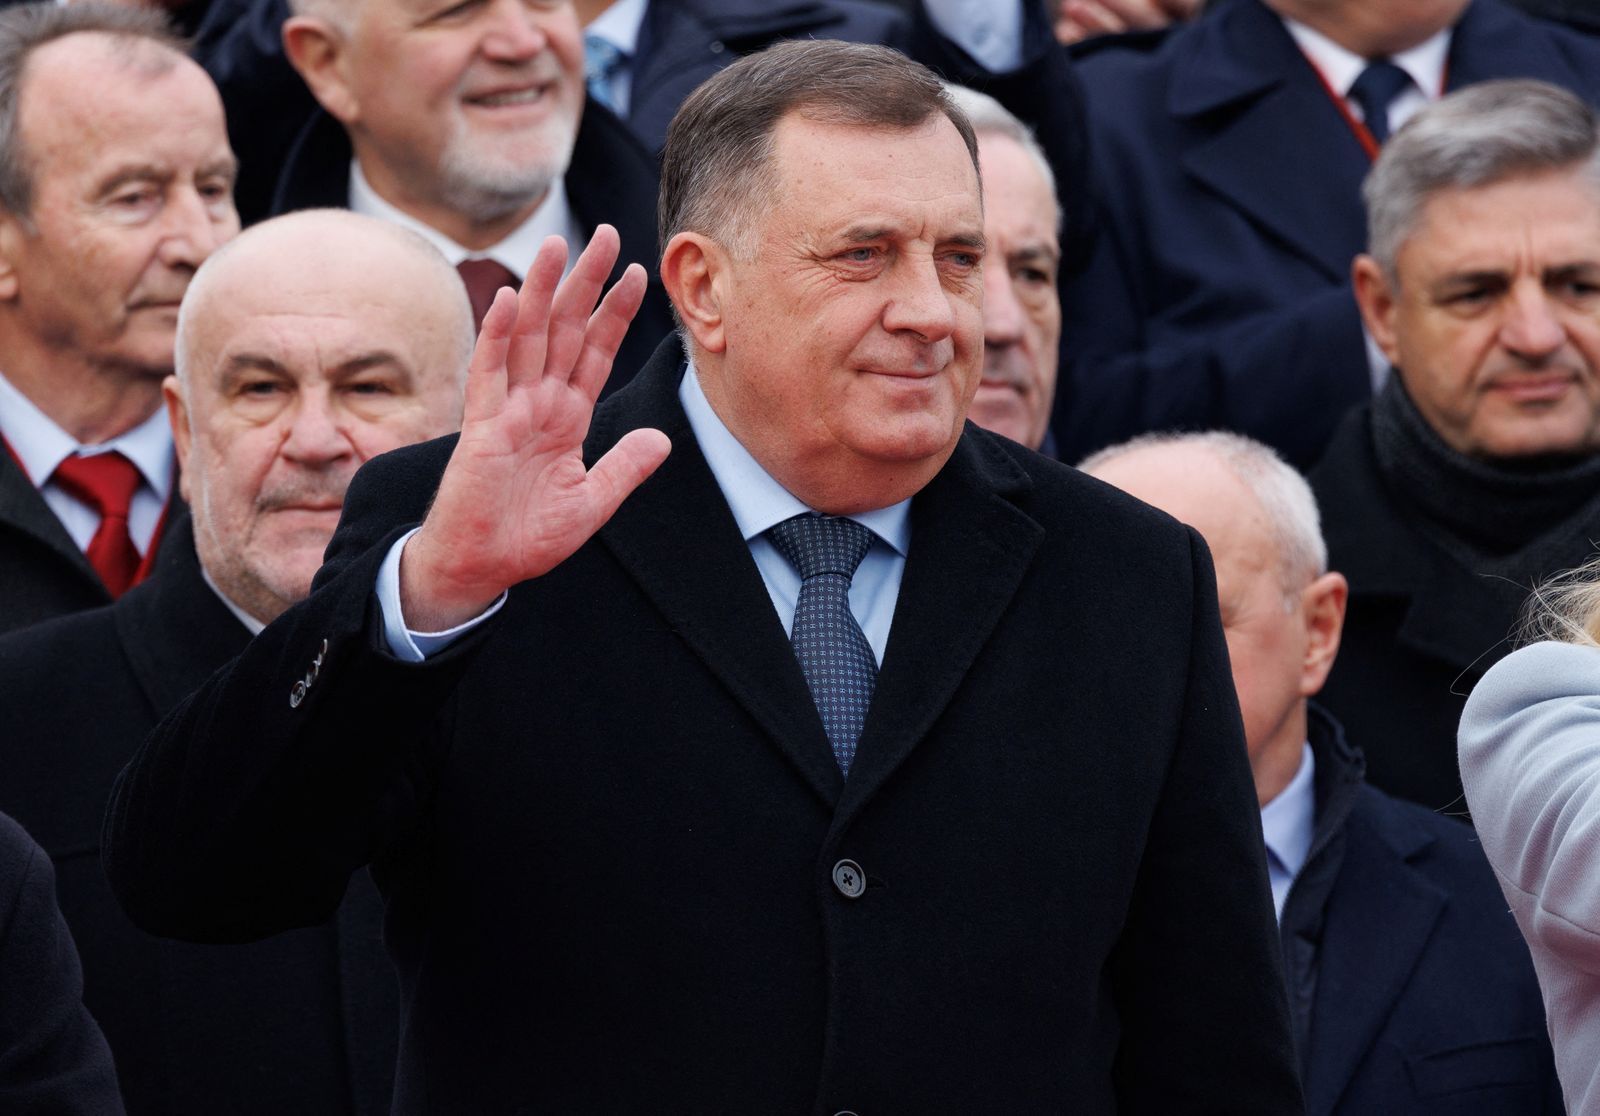 Bosnia's member of tripartite presidency Milorad Dodik waves to people during parade celebrations to mark their autonomous Serb Republic's national holiday, in Banja Luka - REUTERS